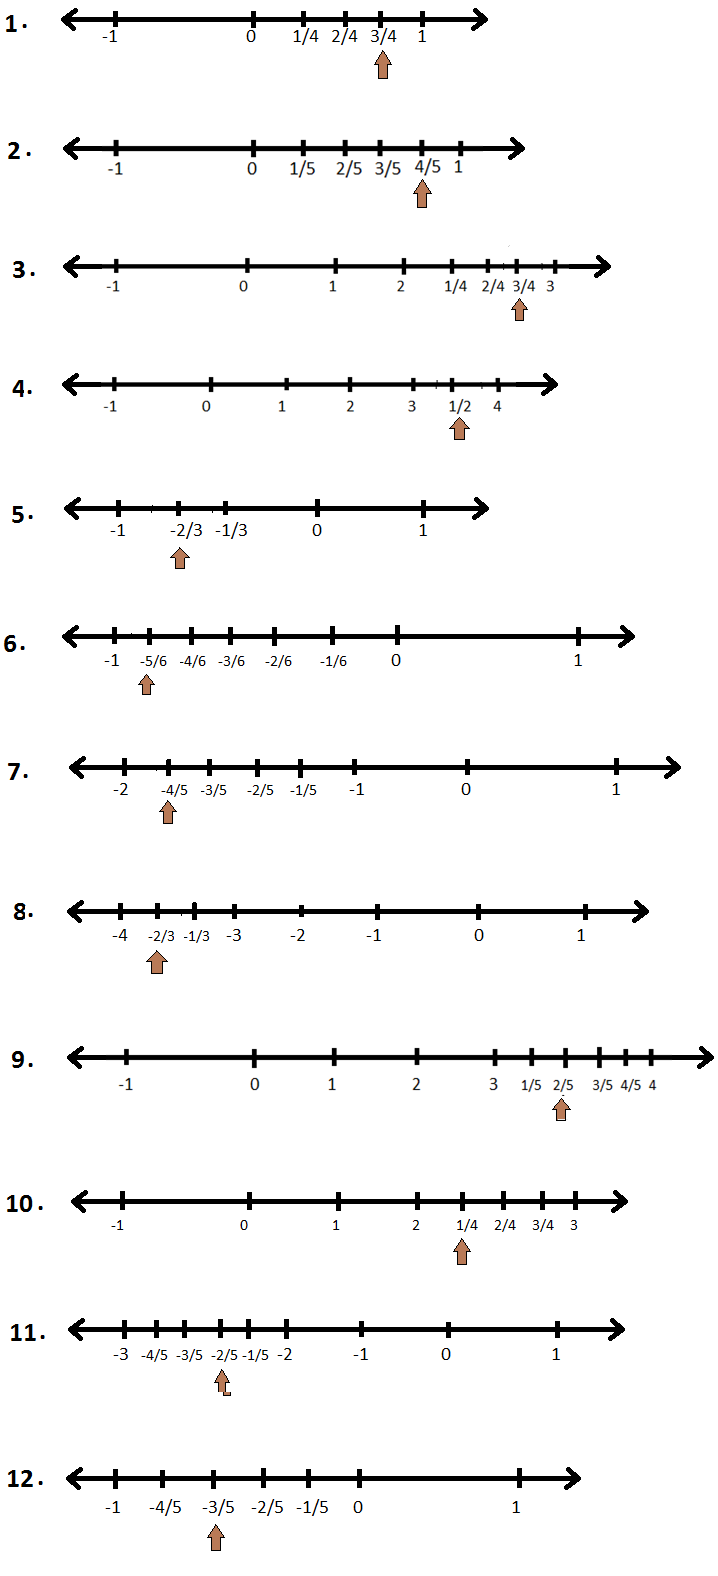 Graphing Rational Numbers On A Number Line Worksheet Pdf